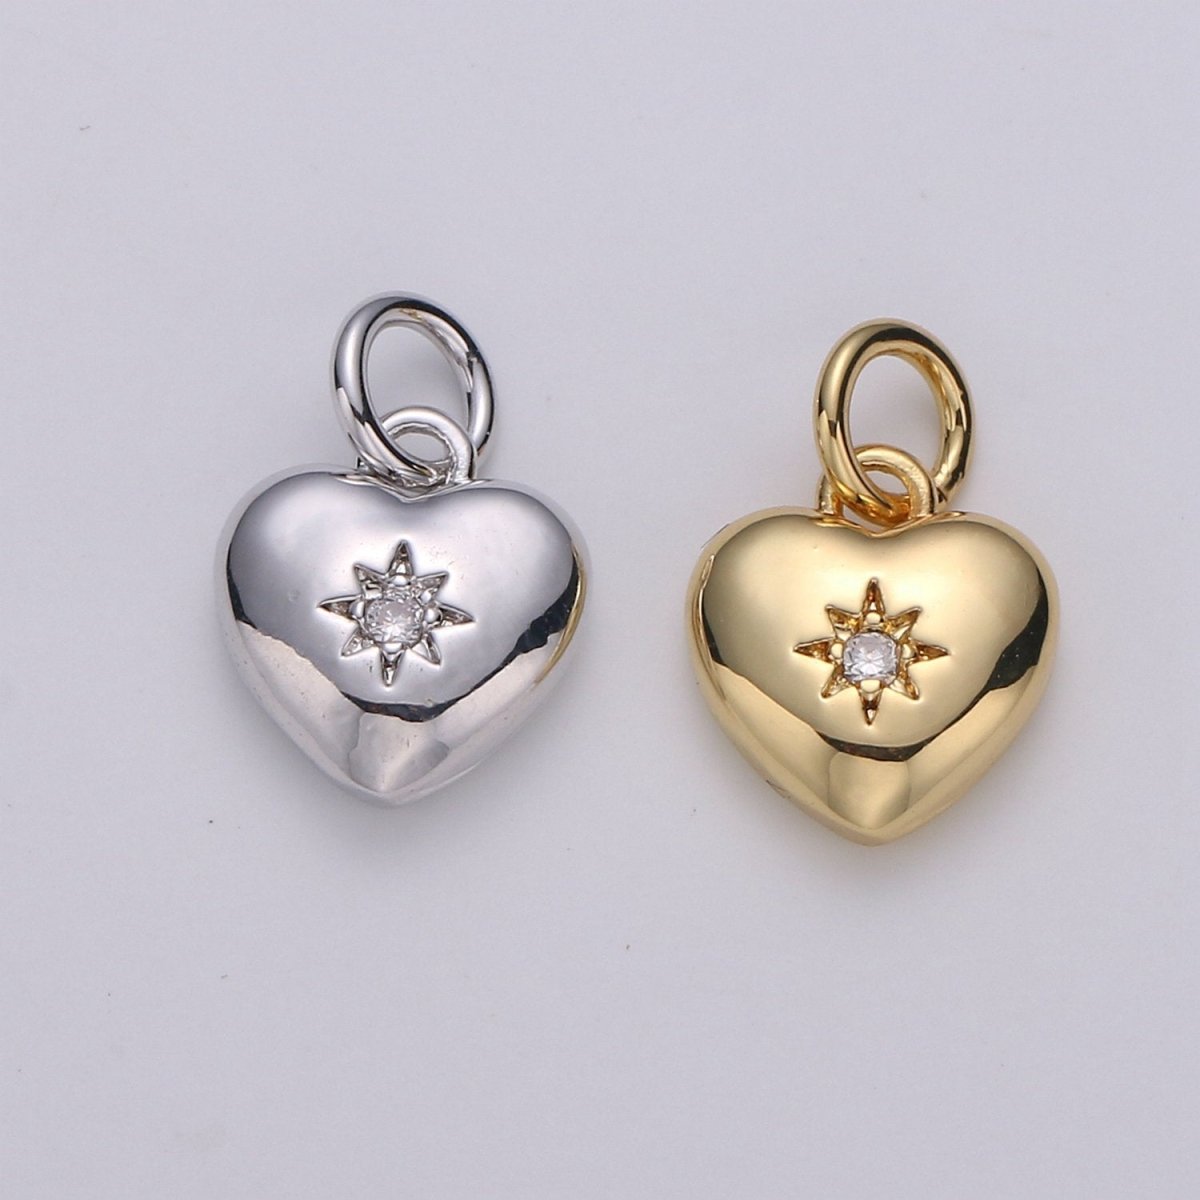 Dainty 14k Gold Filled North Star Charm Cubic Zirconia Heart Pendant in Gold micro Pave CZ North Star Pendant Jewelry Making D-419 D-420 - DLUXCA